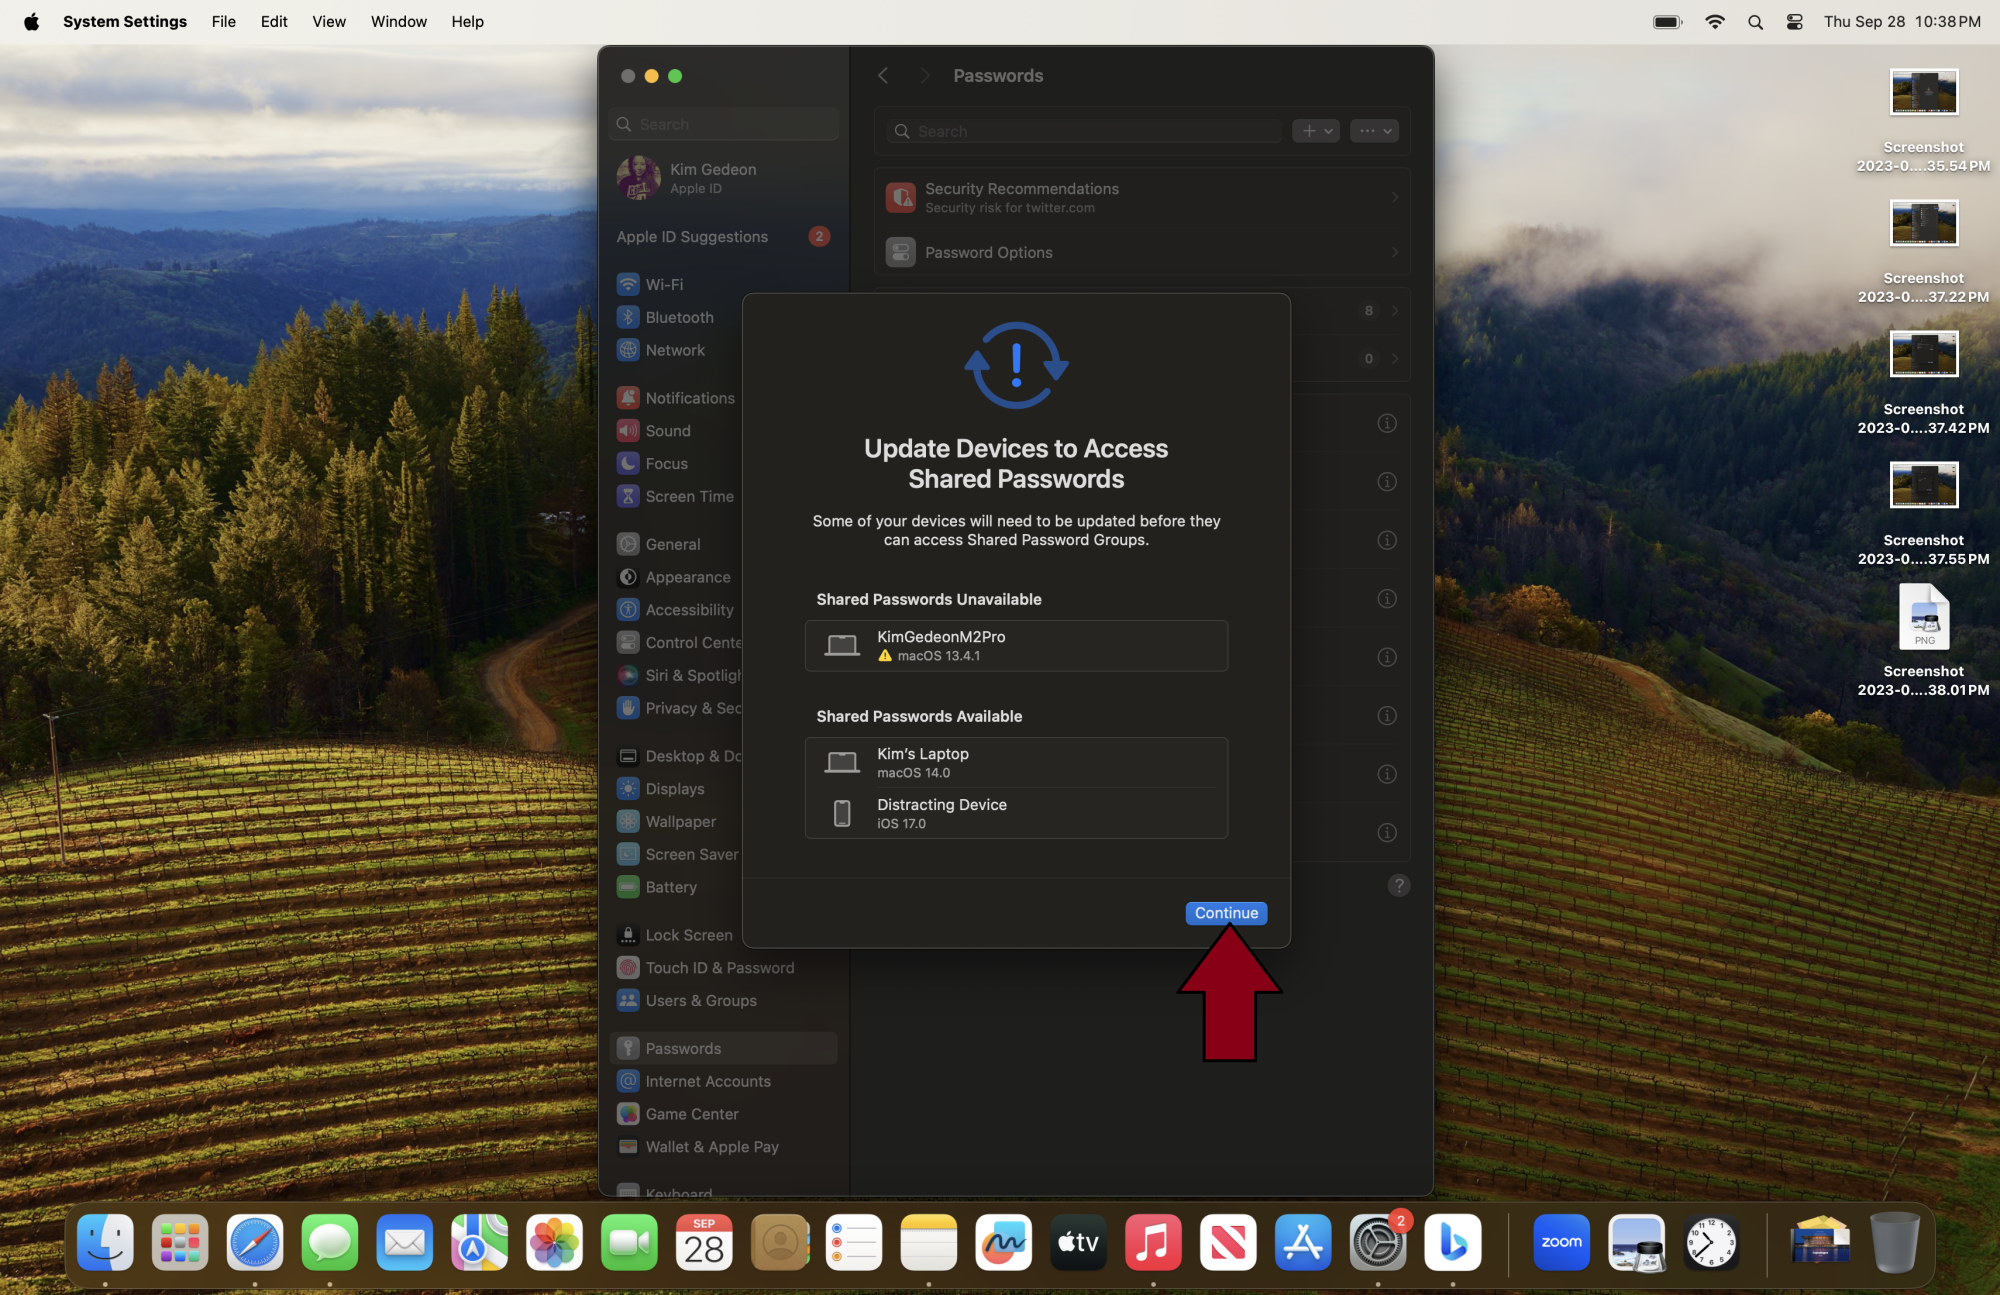 Bouton Continuer dans macOS Sonoma